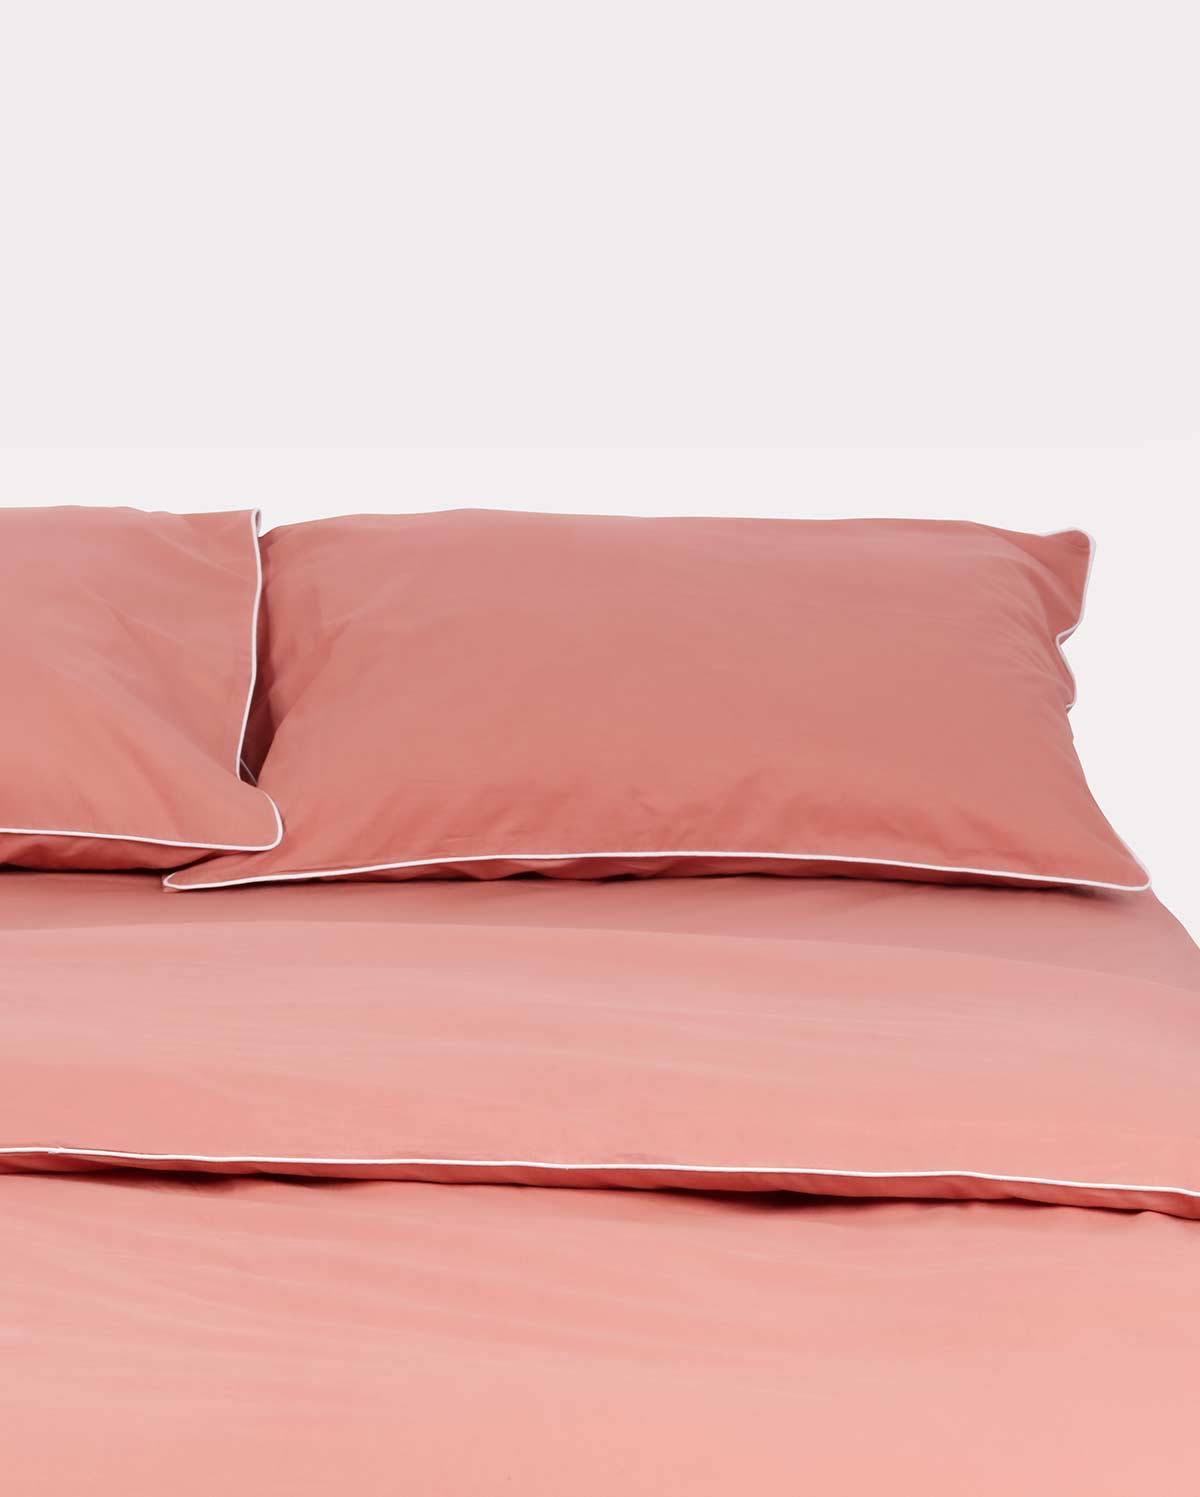 Classic Percale Duvet Cover- Peach with White Piped Edge